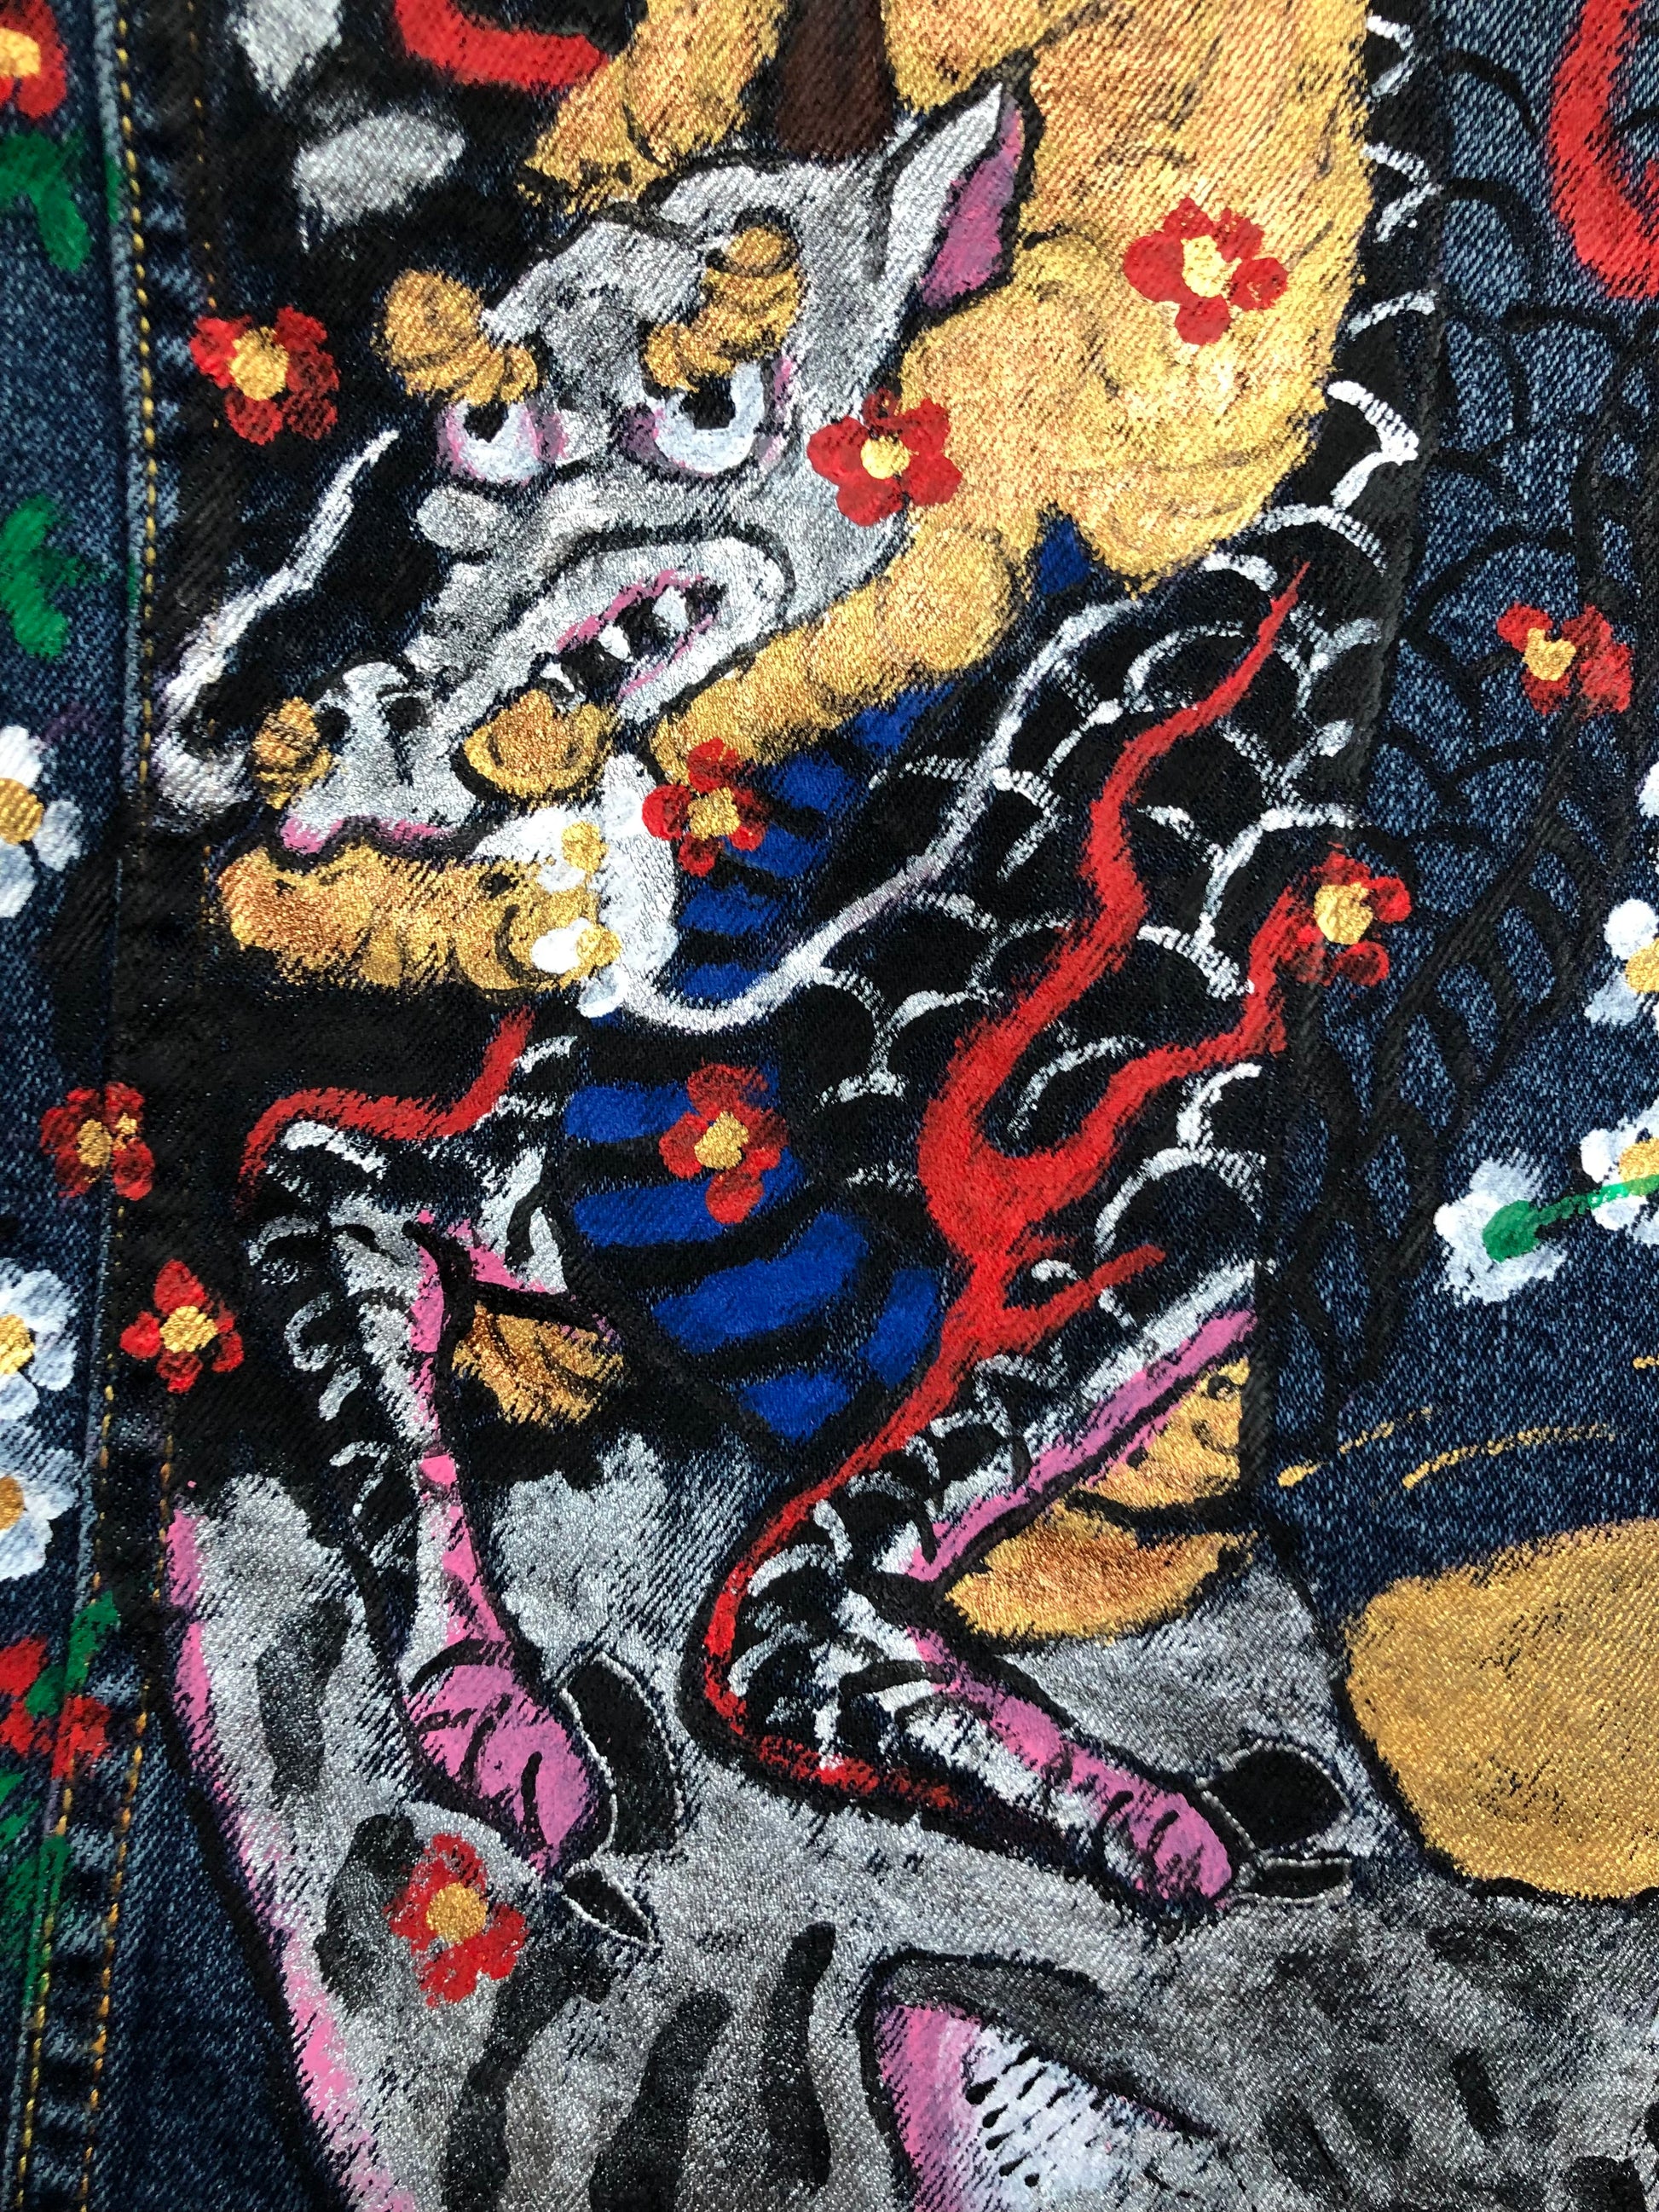 Demon tattoo with hooves on a women's denim jacket